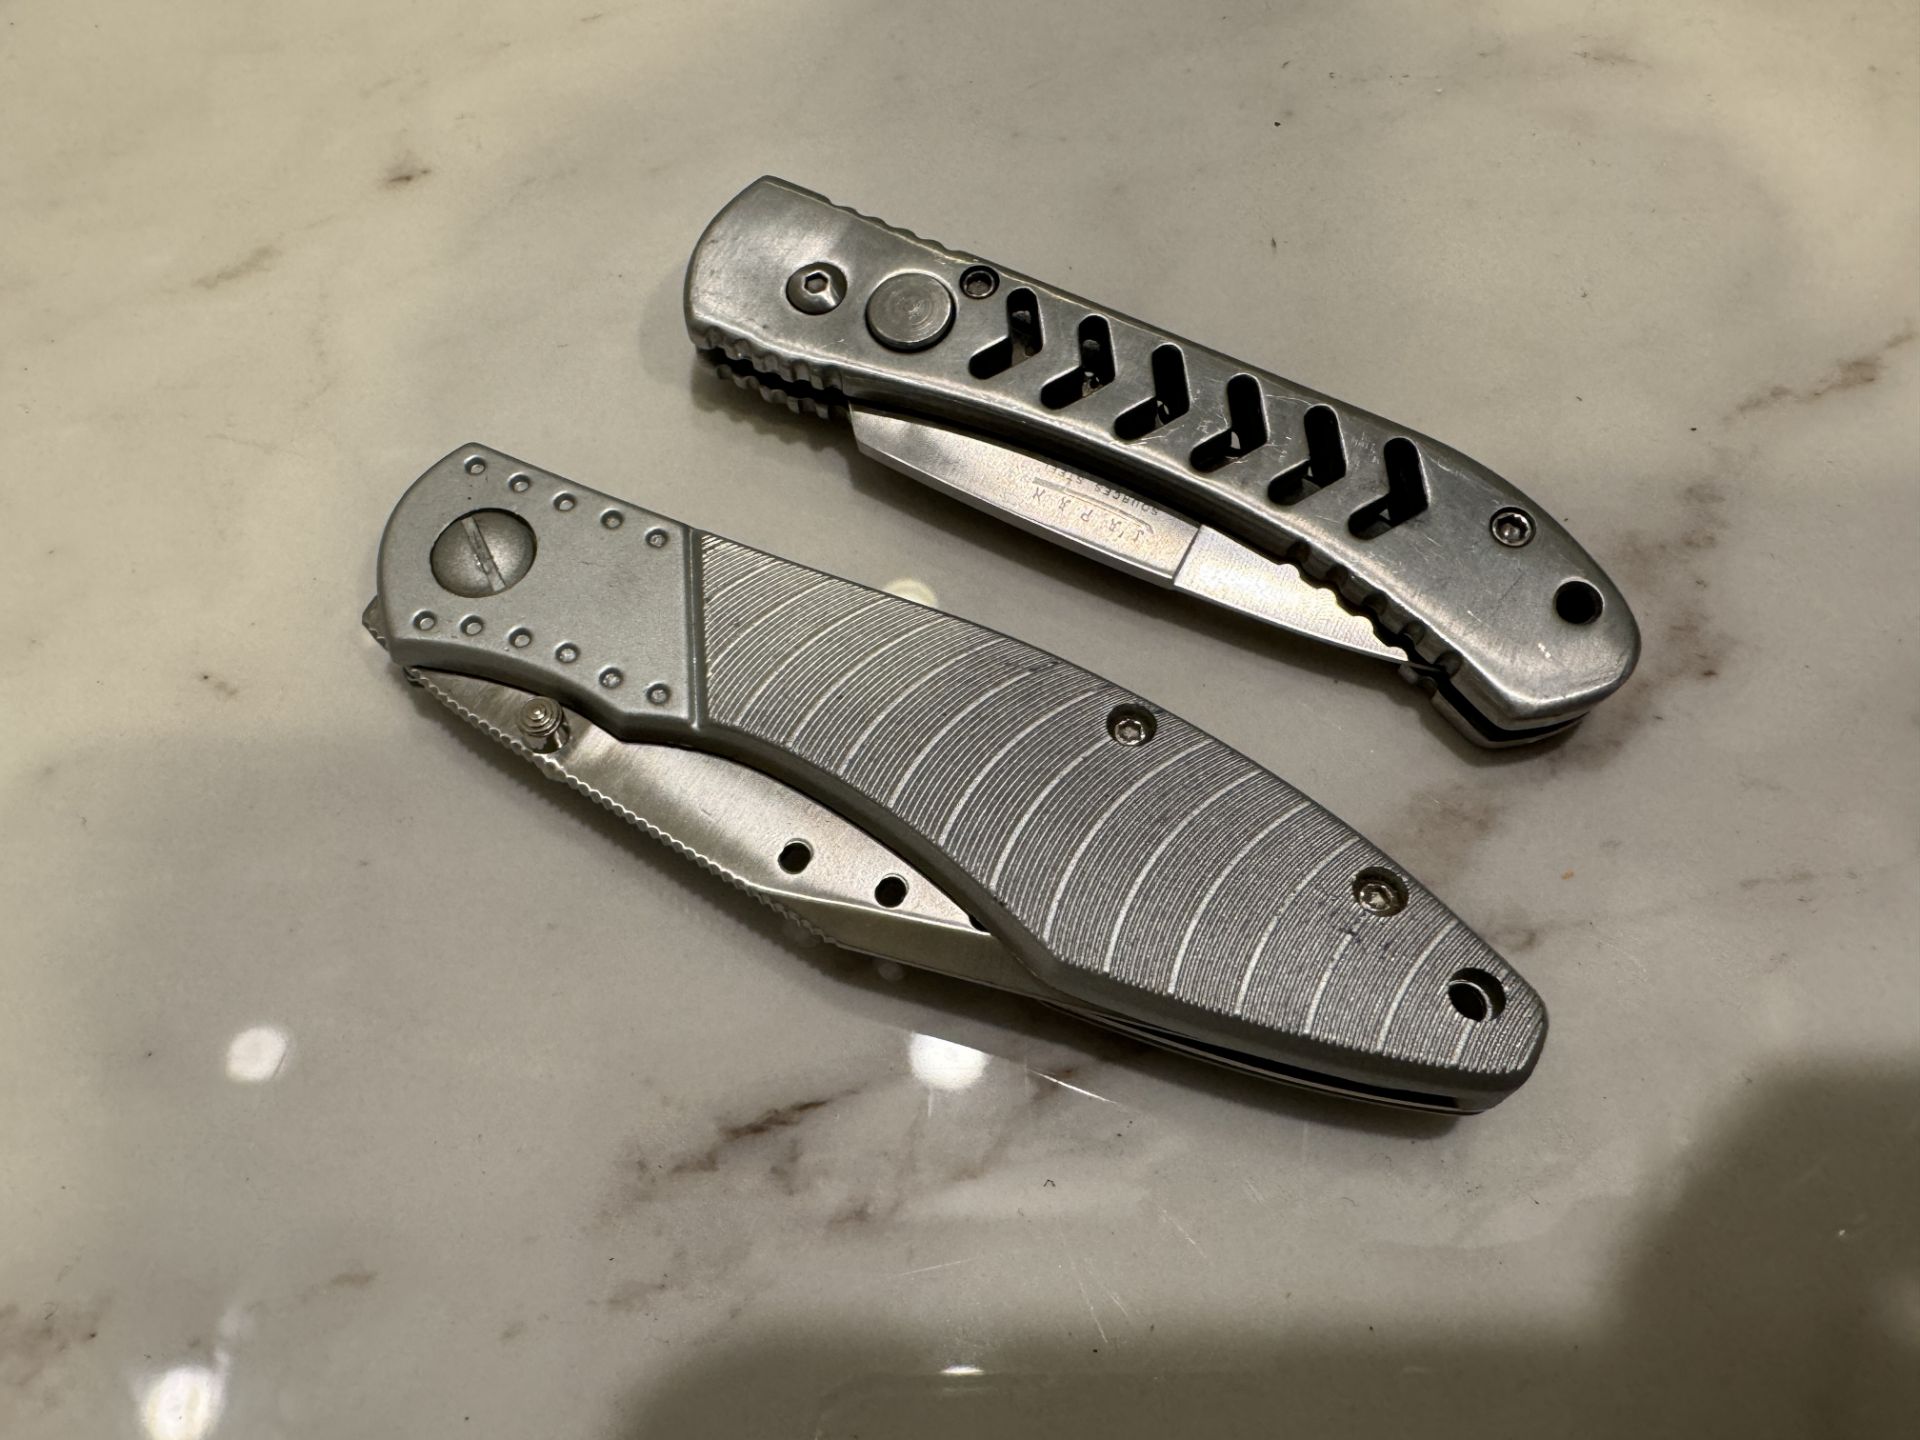 2 POCKET KNIVES, ONE IS SPRING LOADED